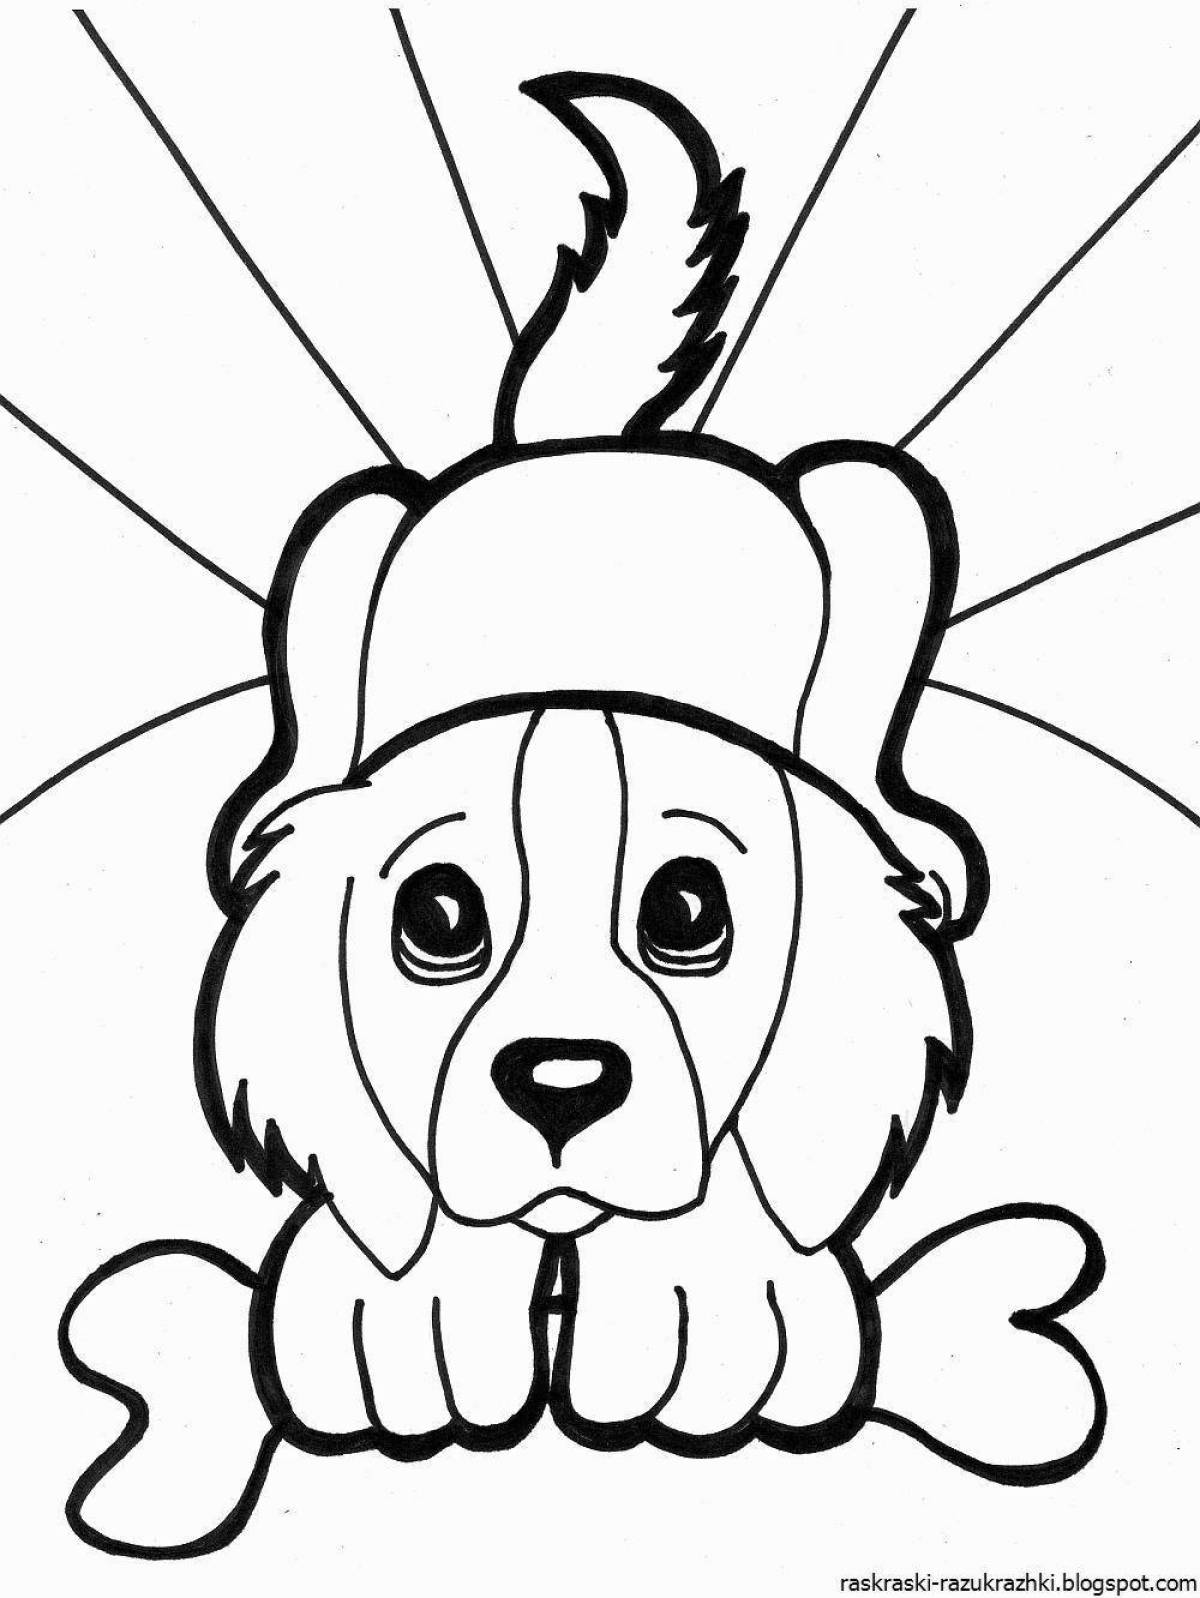 A playful dog coloring book for kids